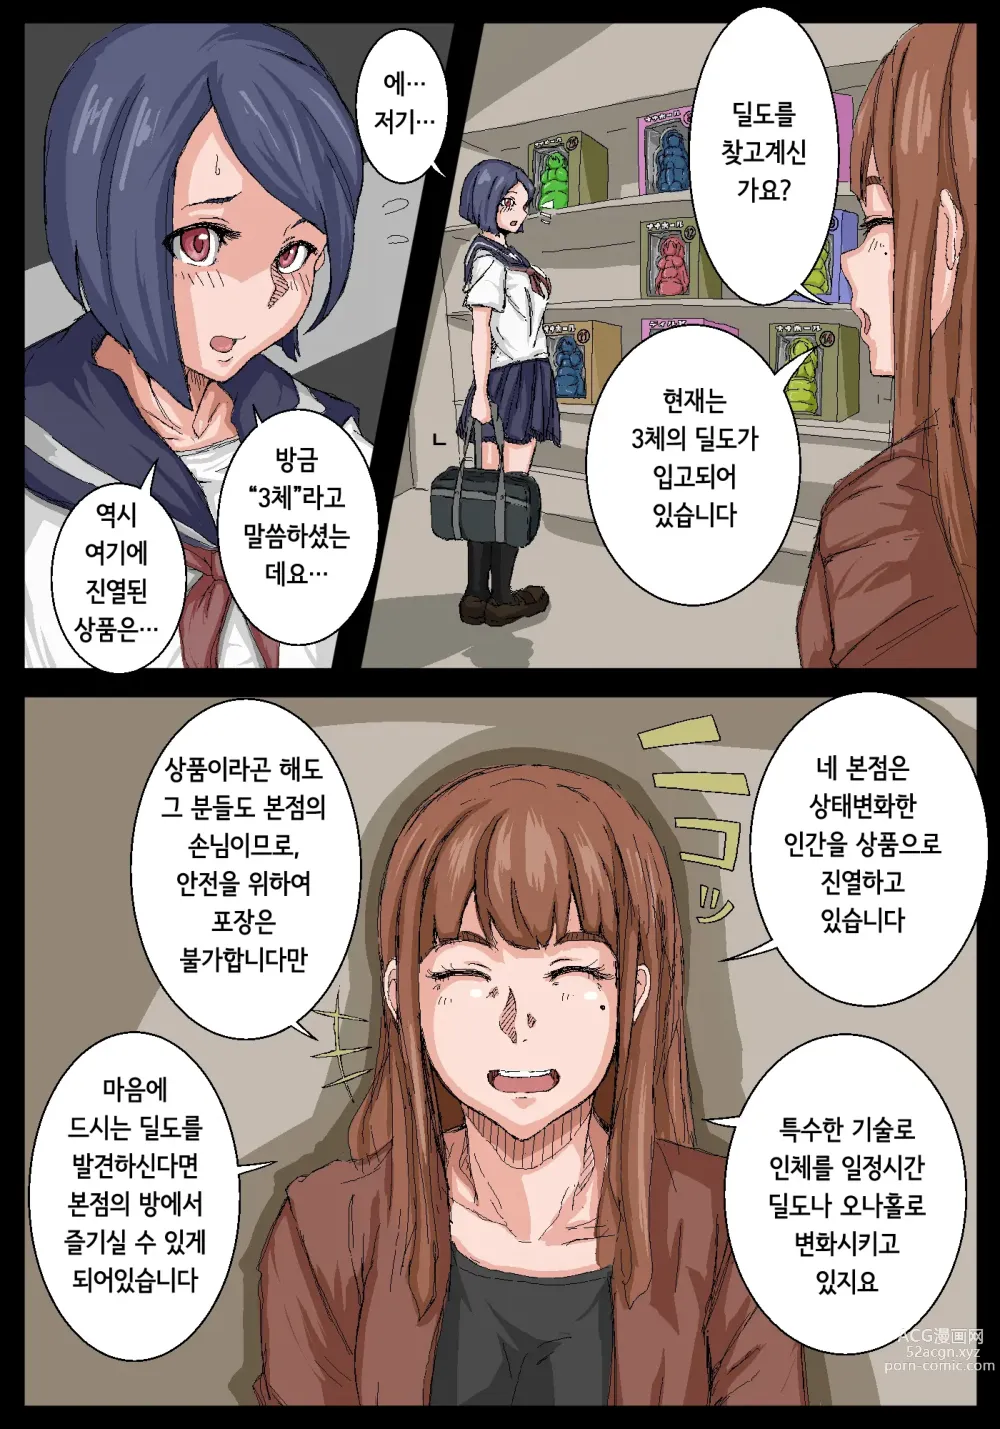 Page 5 of doujinshi 오나홀 선배